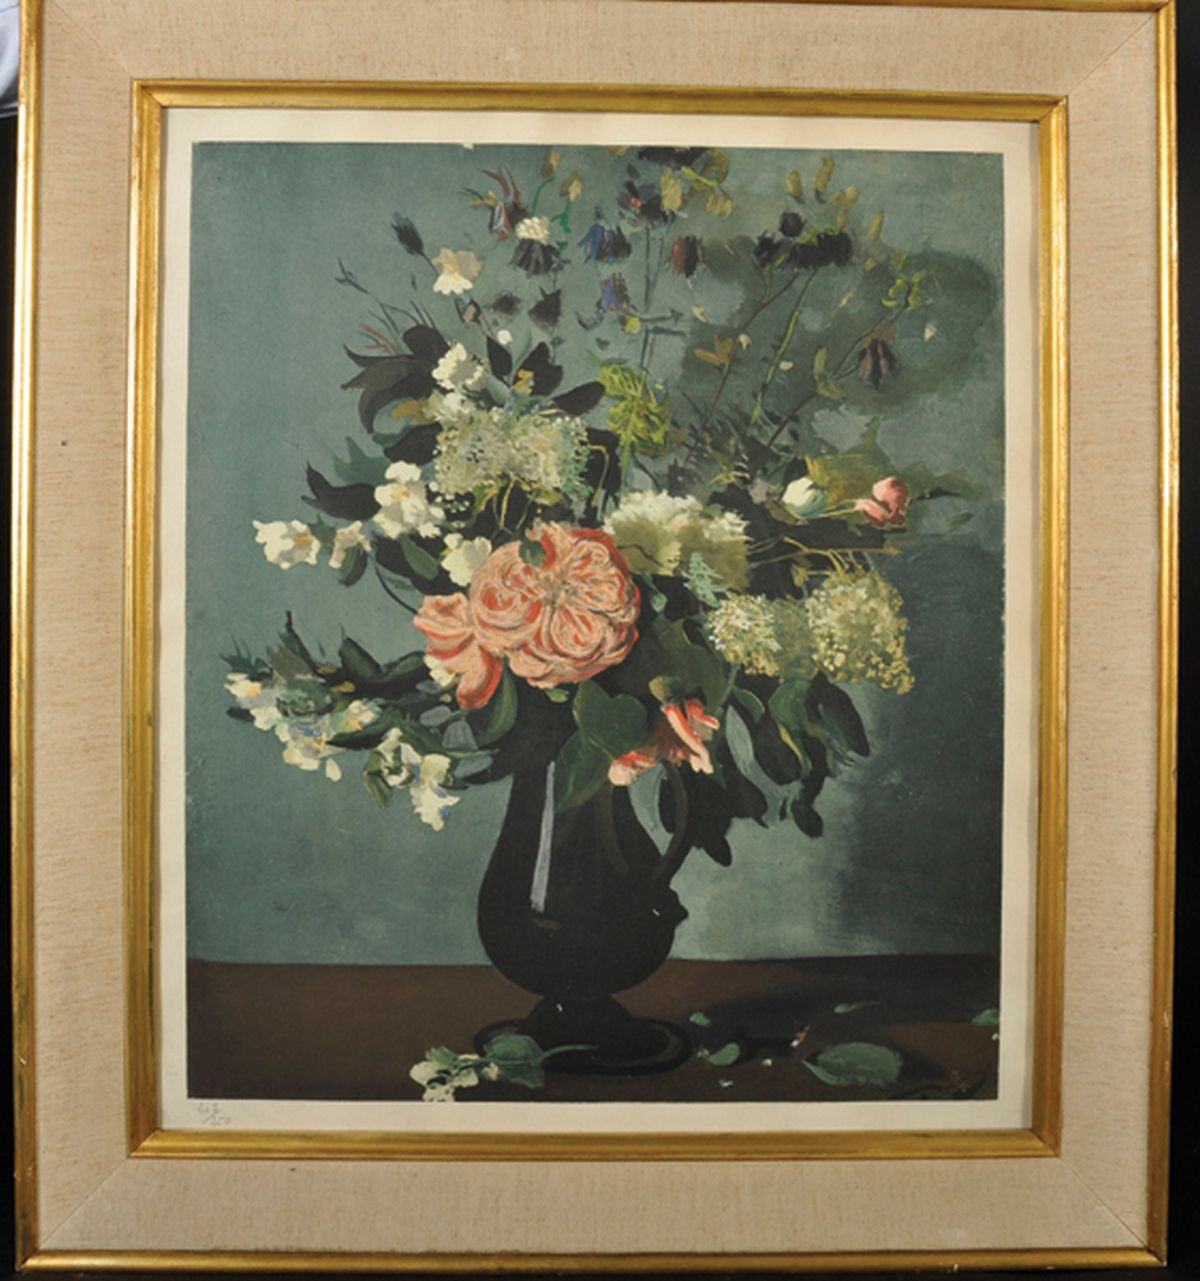 Andre Derain (1880-1954) French. "Vase de Fleurs", Lithograph, Numbered 202/250 in Pencil, and a - Image 2 of 5